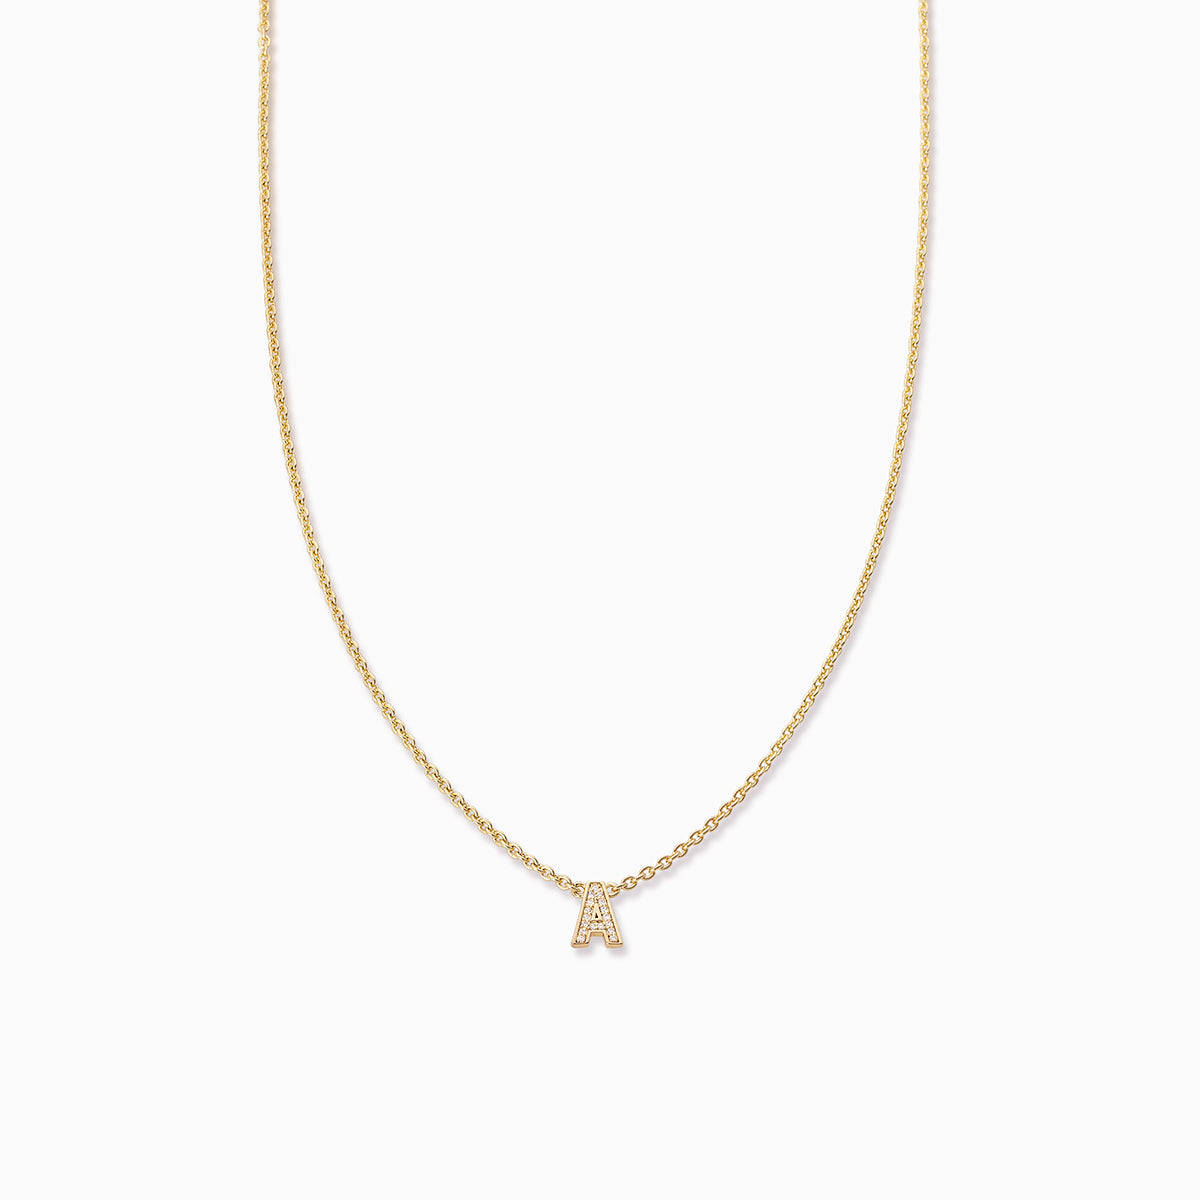 Gold Sur 2.0 Initial Necklace, Personalized Jewelry